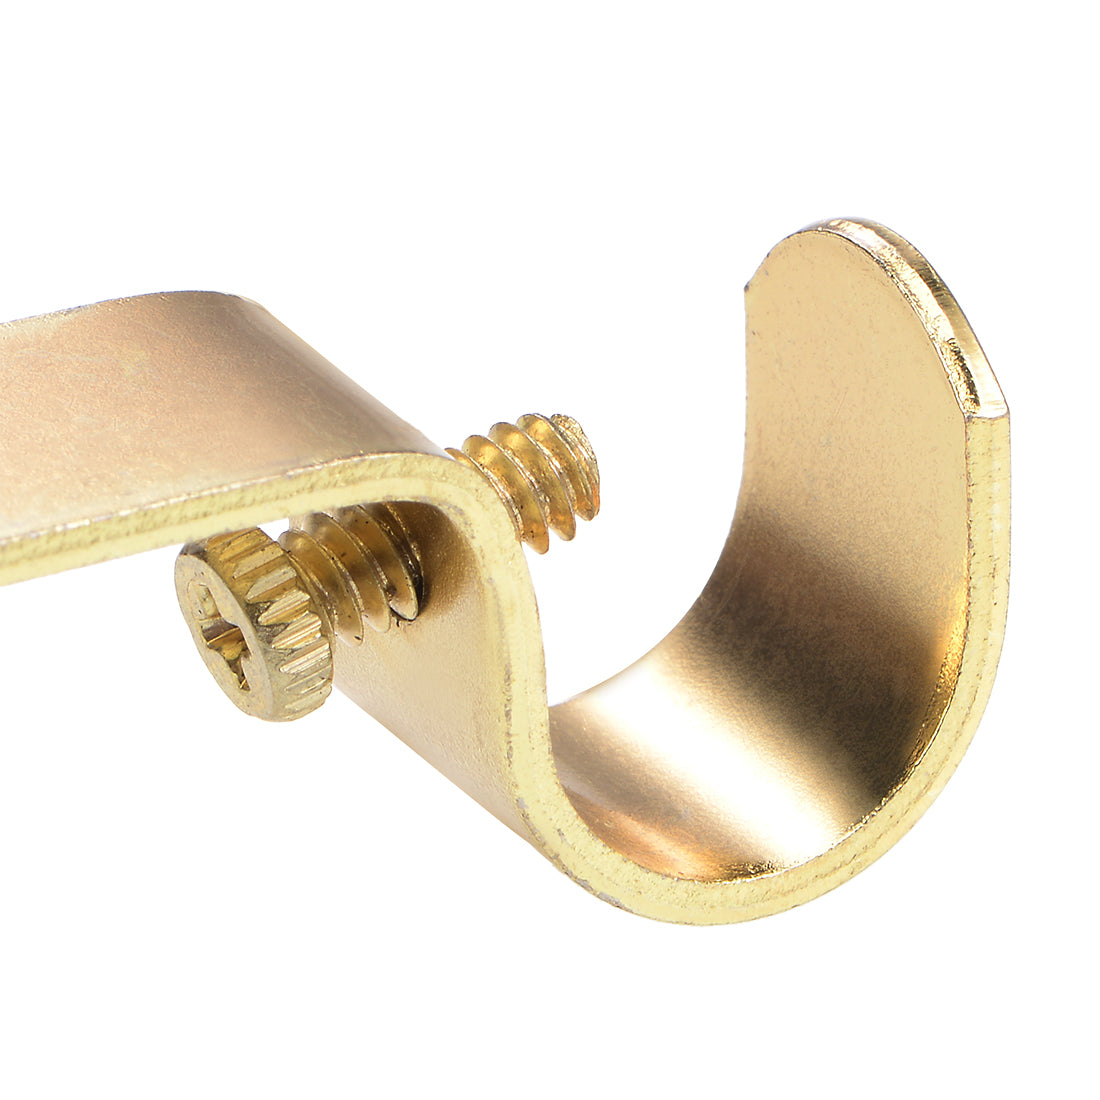 uxcell Uxcell Curtain Rod Bracket Iron Single Holder Support for 16mm Drapery Rod, 73 x 36 x 16mm Gold Tone 6Pcs